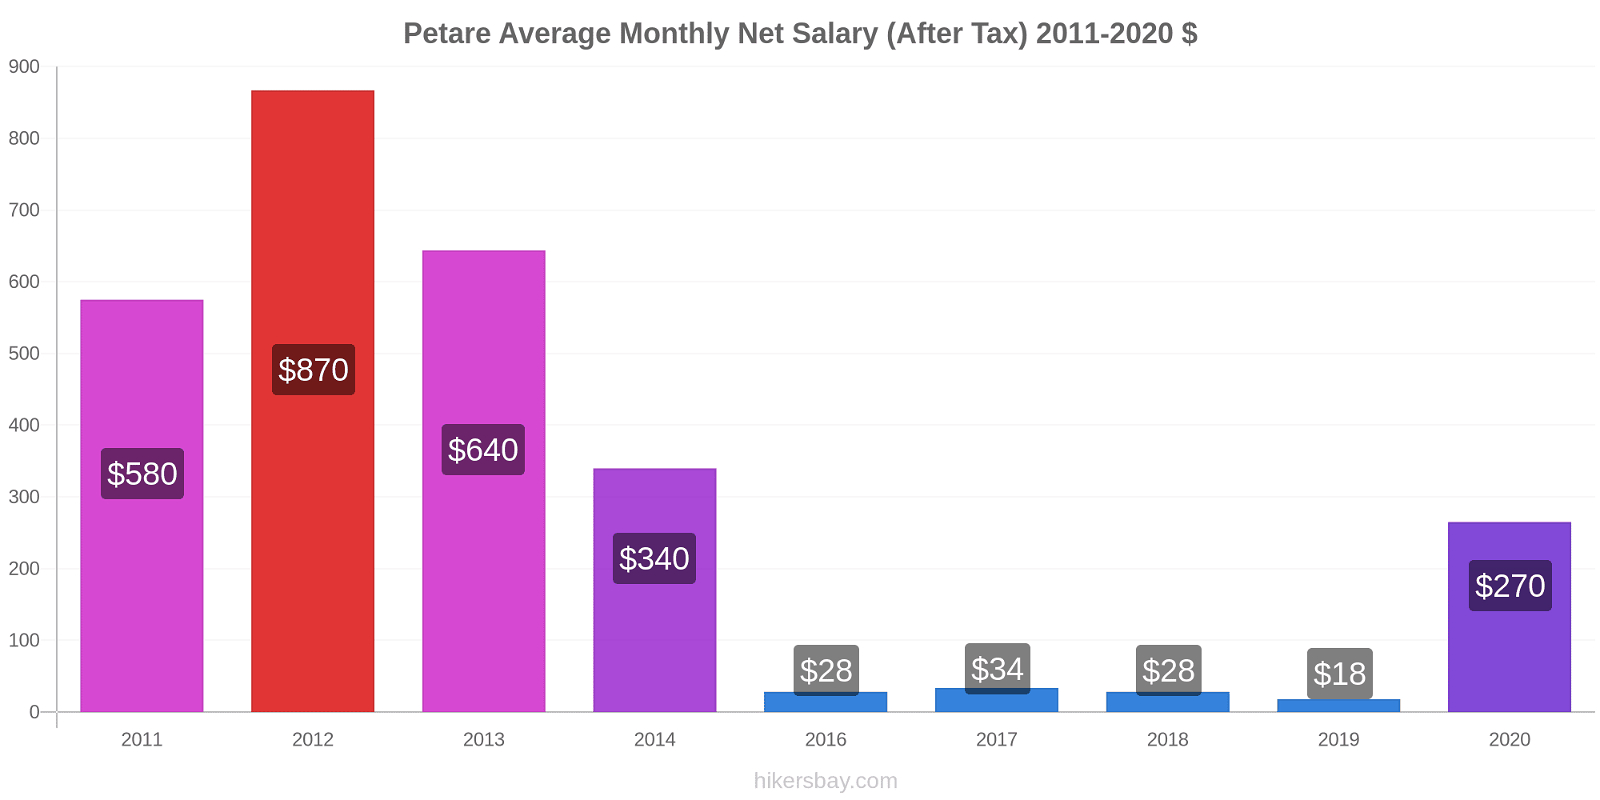 Petare price changes Average Monthly Net Salary (After Tax) hikersbay.com